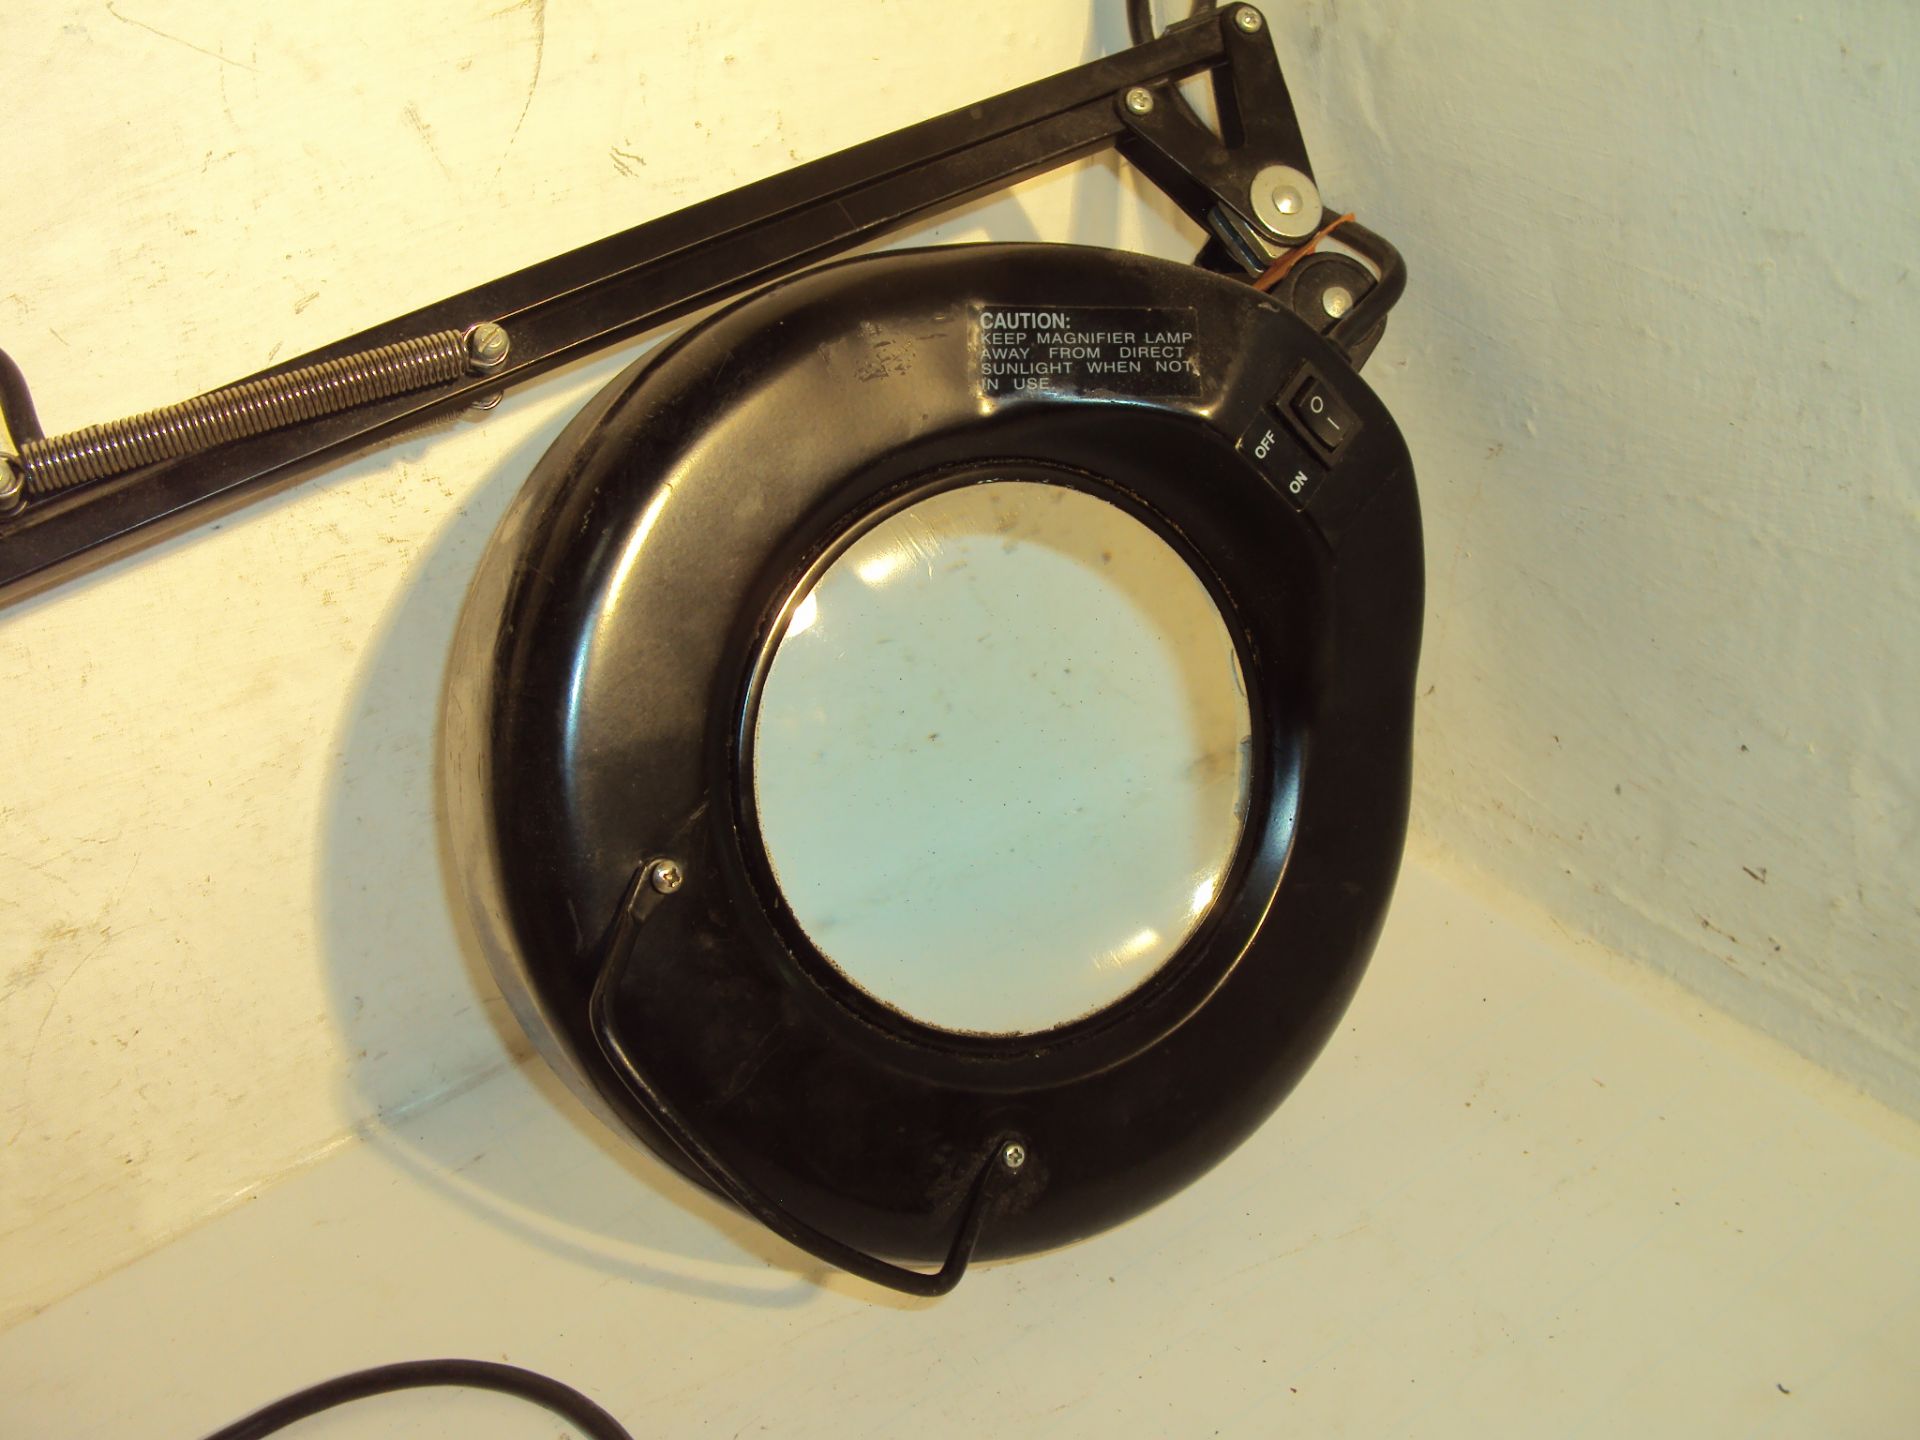 Articulating Arm Lighted Magnifier - Image 3 of 5